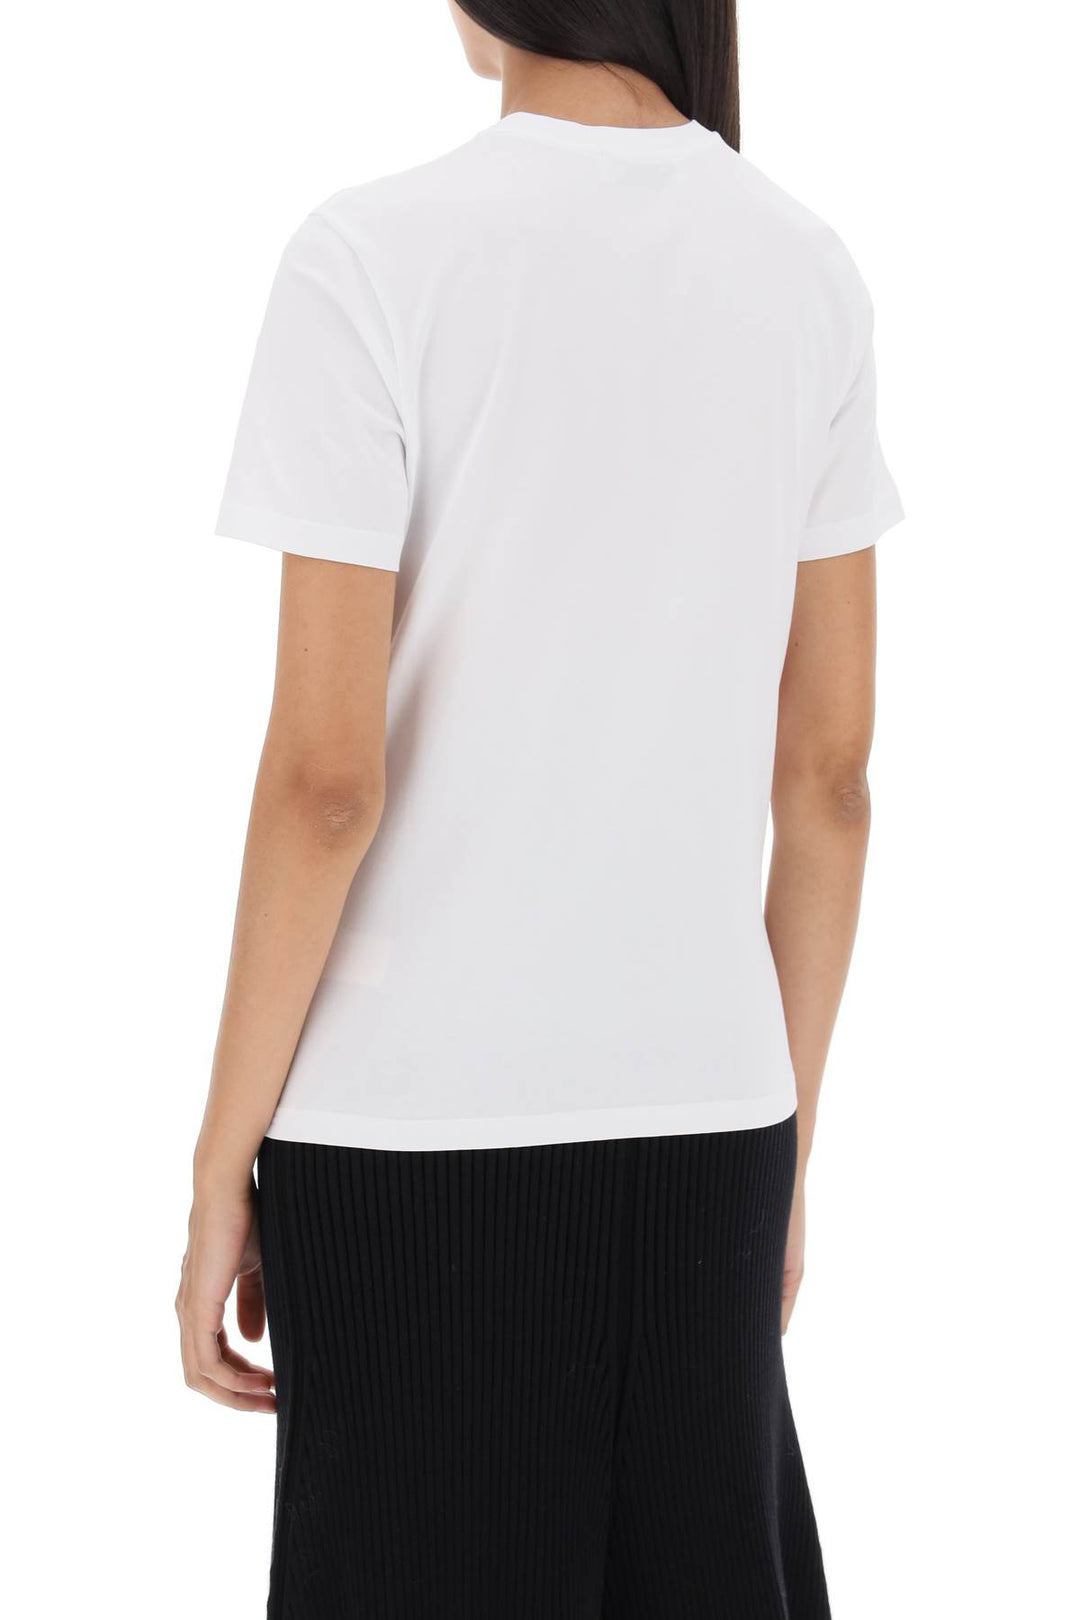 Tory burch regular t-shirt with embroidered logo-2